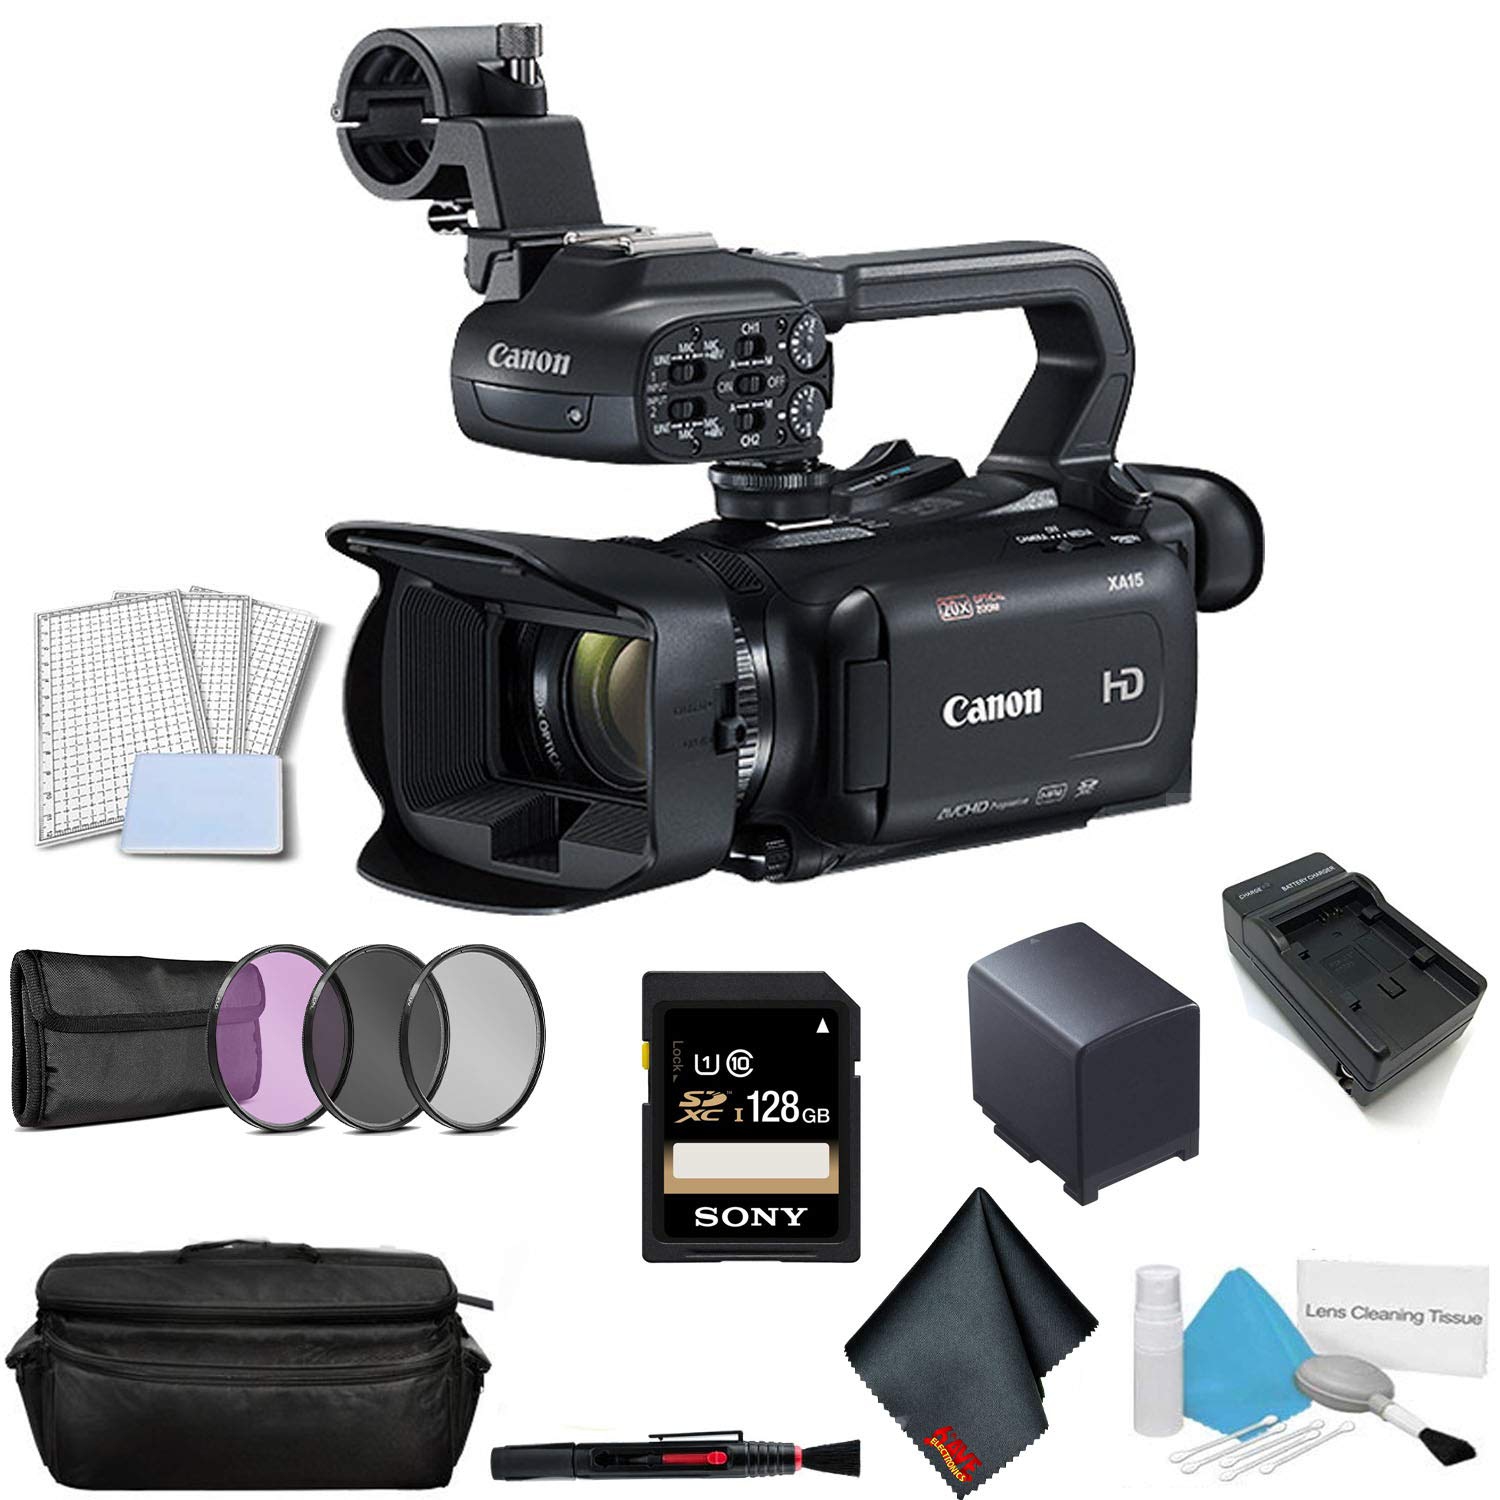 Canon XA15 Compact Full HD Camcorder with SDI, HDMI, and Composite Output Bundle with 128GB Memory Card + Spare Battery